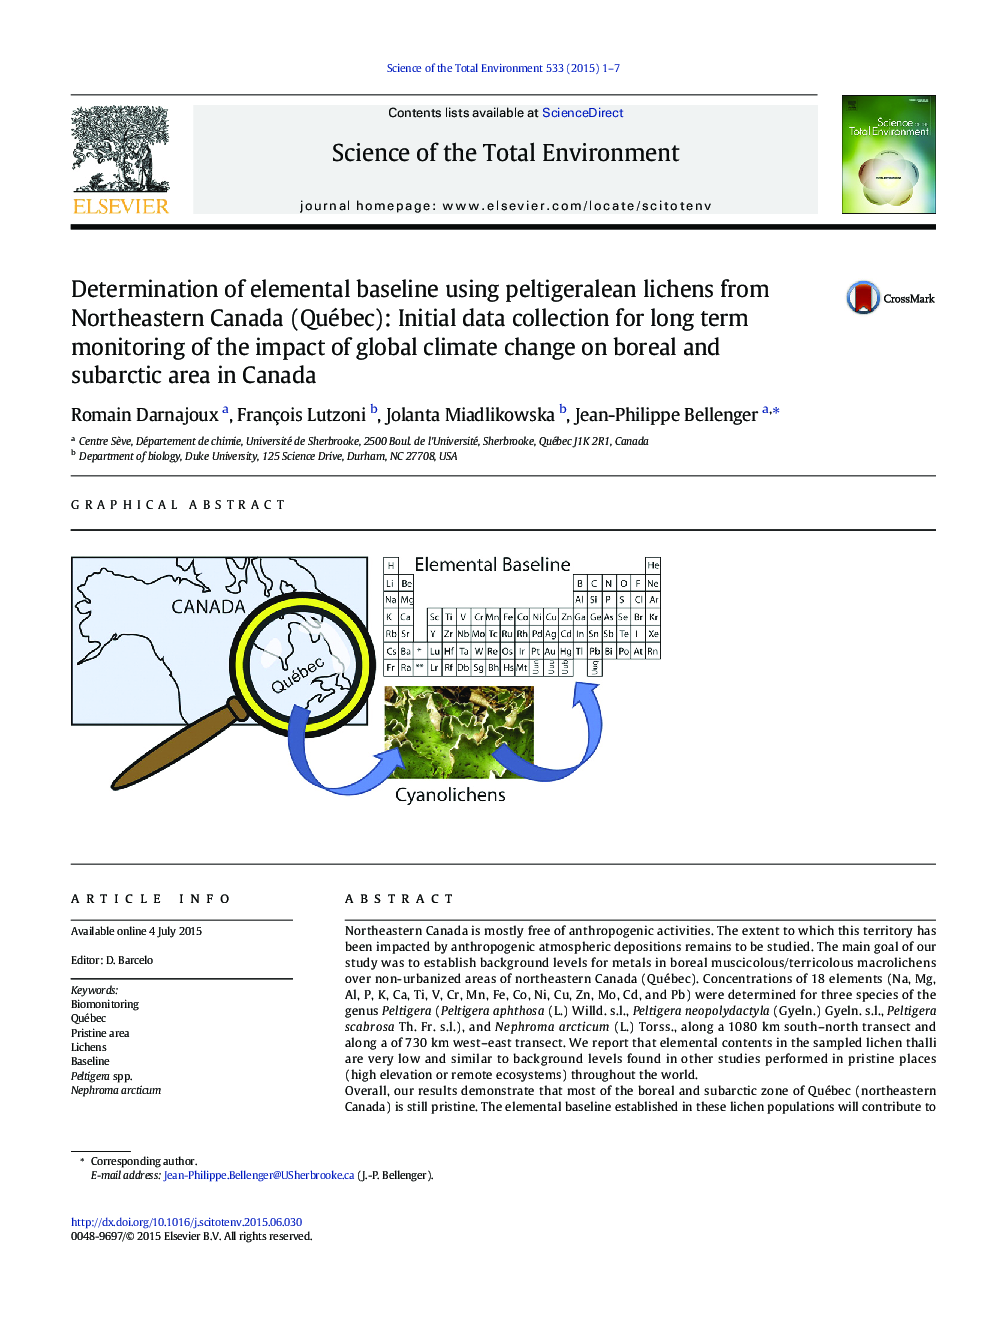 Determination of elemental baseline using peltigeralean lichens from Northeastern Canada (Québec): Initial data collection for long term monitoring of the impact of global climate change on boreal and subarctic area in Canada